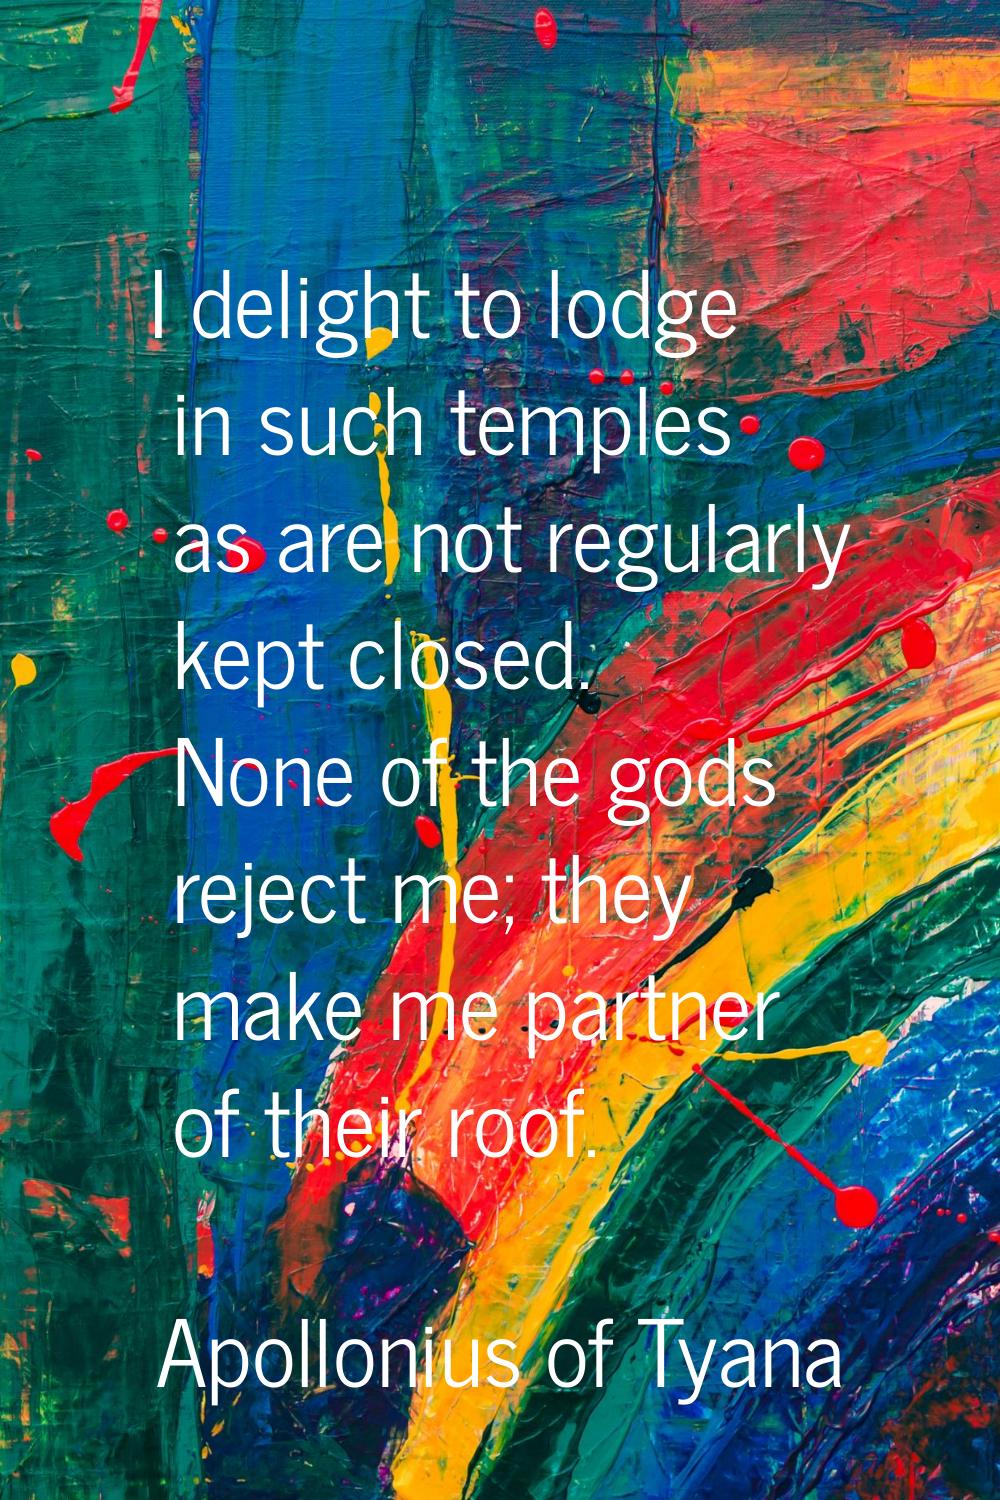 I delight to lodge in such temples as are not regularly kept closed. None of the gods reject me; th